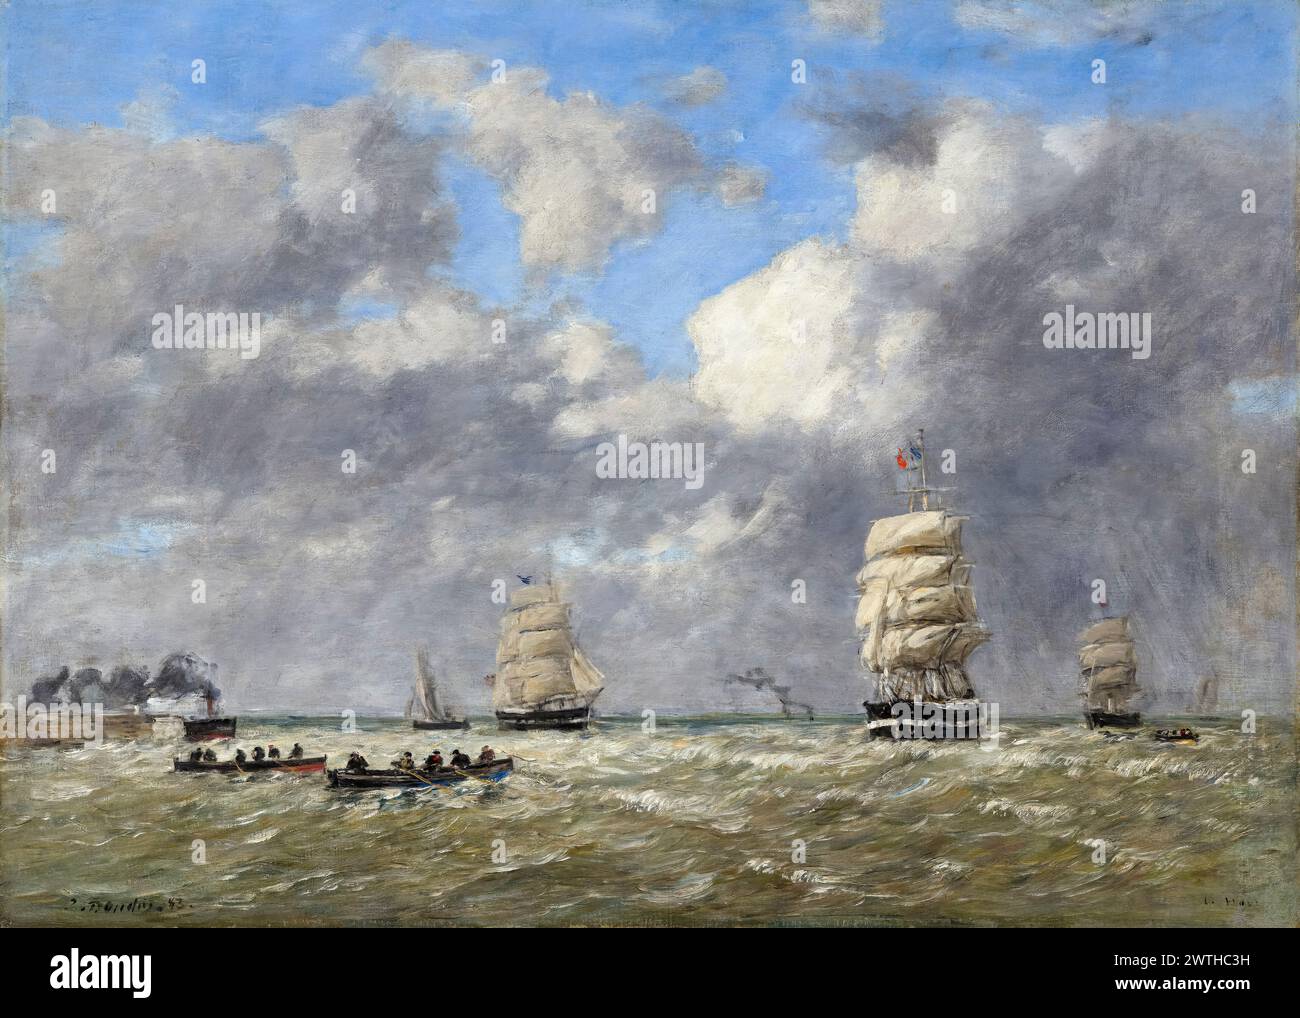 Eugène Boudin, Le Havre, painting in oil on canvas, 1883 Stock Photo